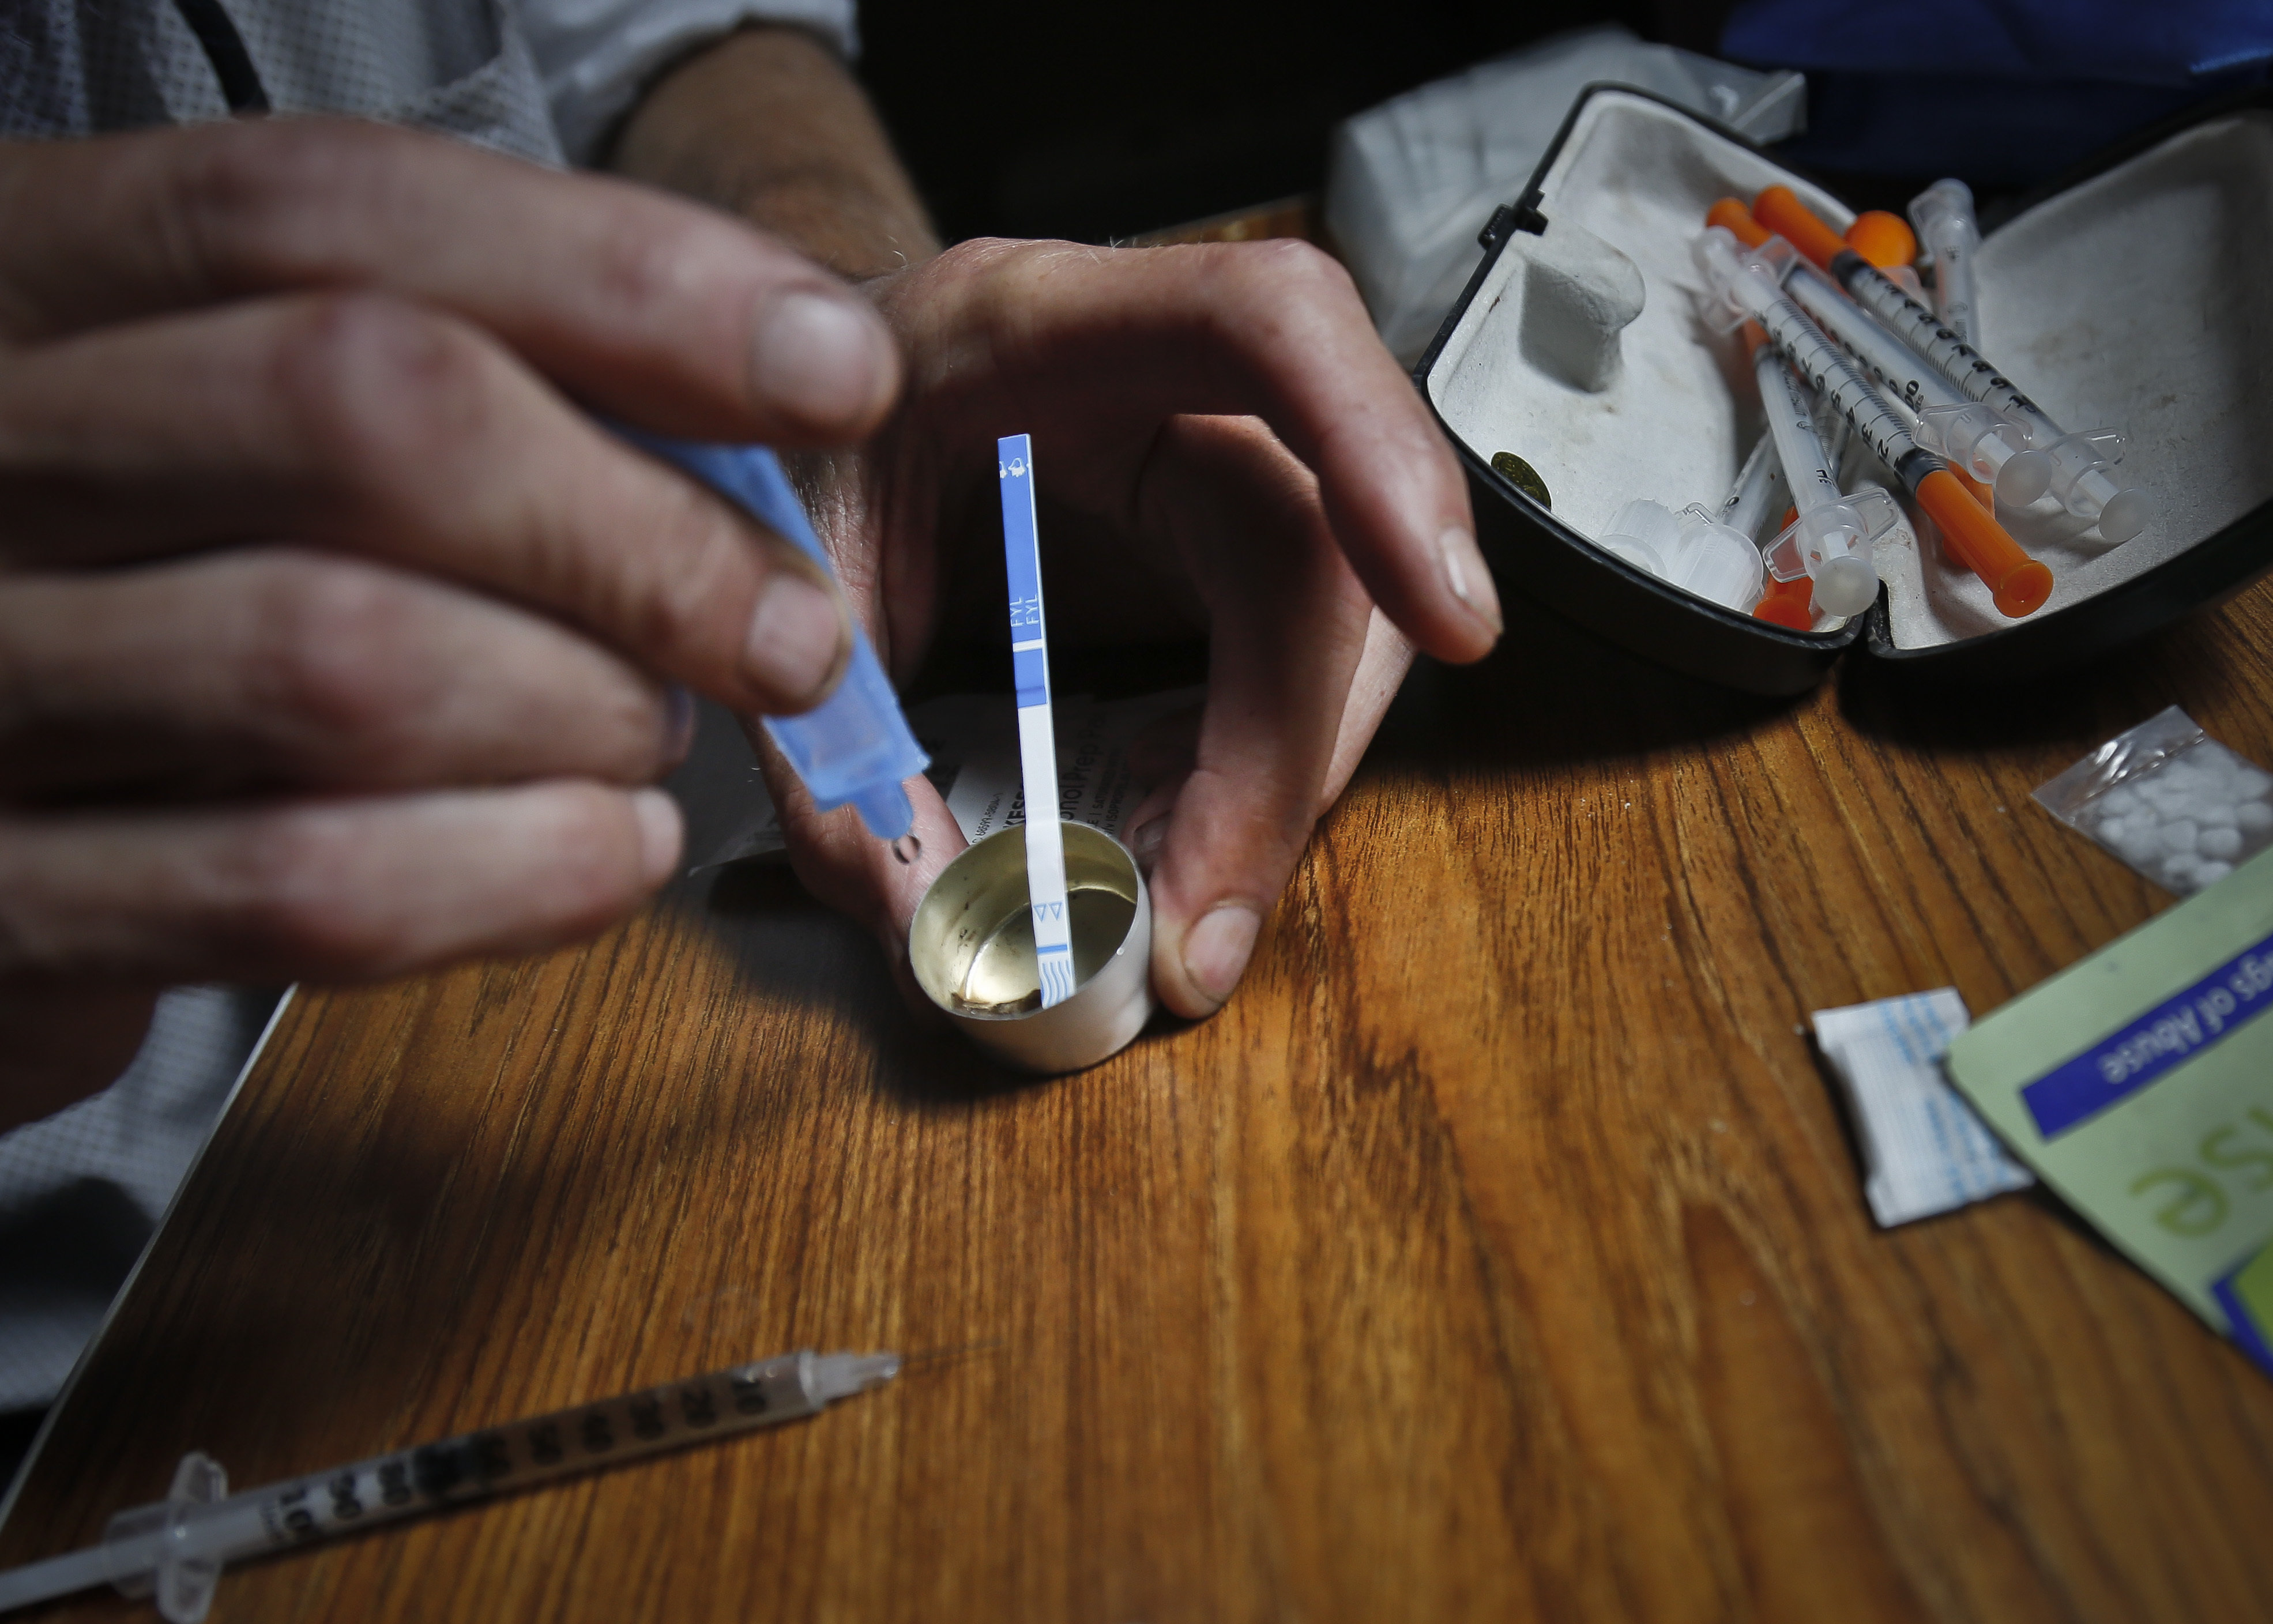 CDC: Fentanyl surpasses Heroin as nation's most deadly drug